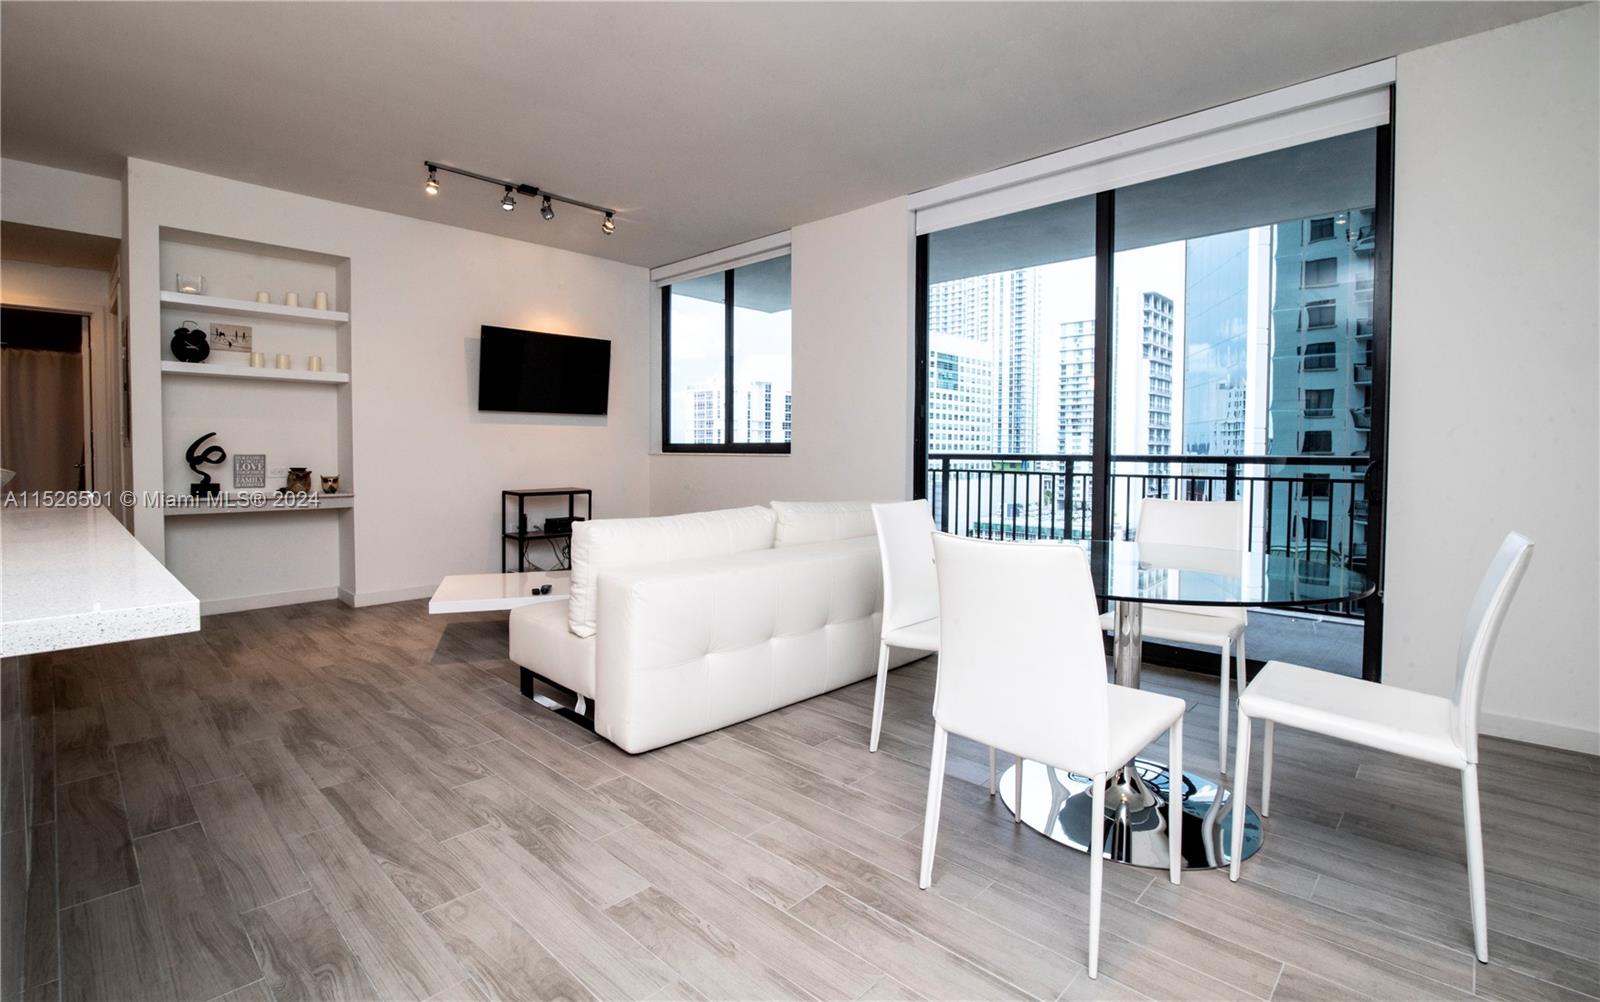 Beautiful & Modern 2 bedroom 2 bathroom Apartment in the heart of Brickell. Stunning views of the city, open kitchen layout with quartz kitchen countertop and backsplash. Luxury amenities including Gym, BBQ, Children playroom & playground, Pool, Spa, Game/ Lounge Room, etc. Washer & Dryer in unit. Includes 1 assigned parking spot. Can be rented 12 months a year (Min 30 day). FOR SHOWINGS PLEASE CALL OR TEXT LISTING AGENTS WITH 24 HR NOTICE!!!